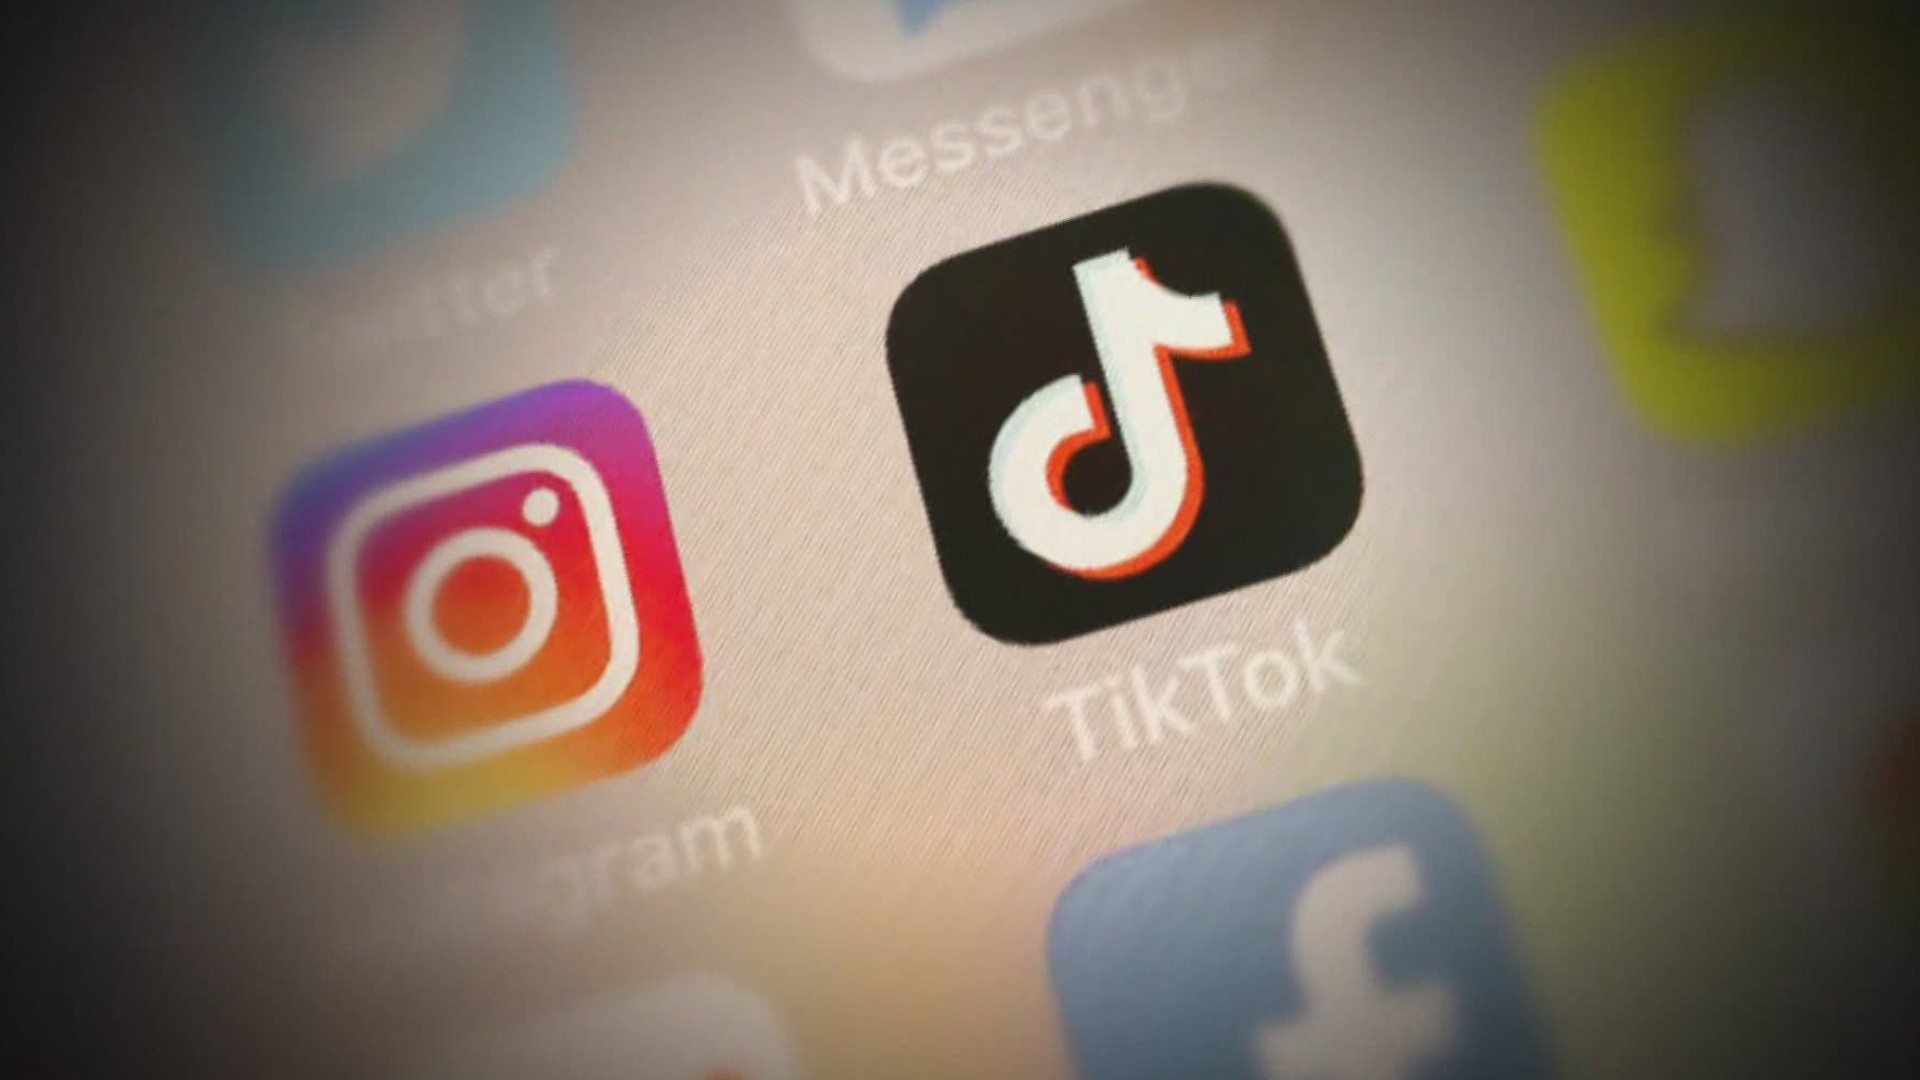 A recent study found that teen girls are developing tic-like symptoms after watching TikTok videos of people with Tourette syndrome.